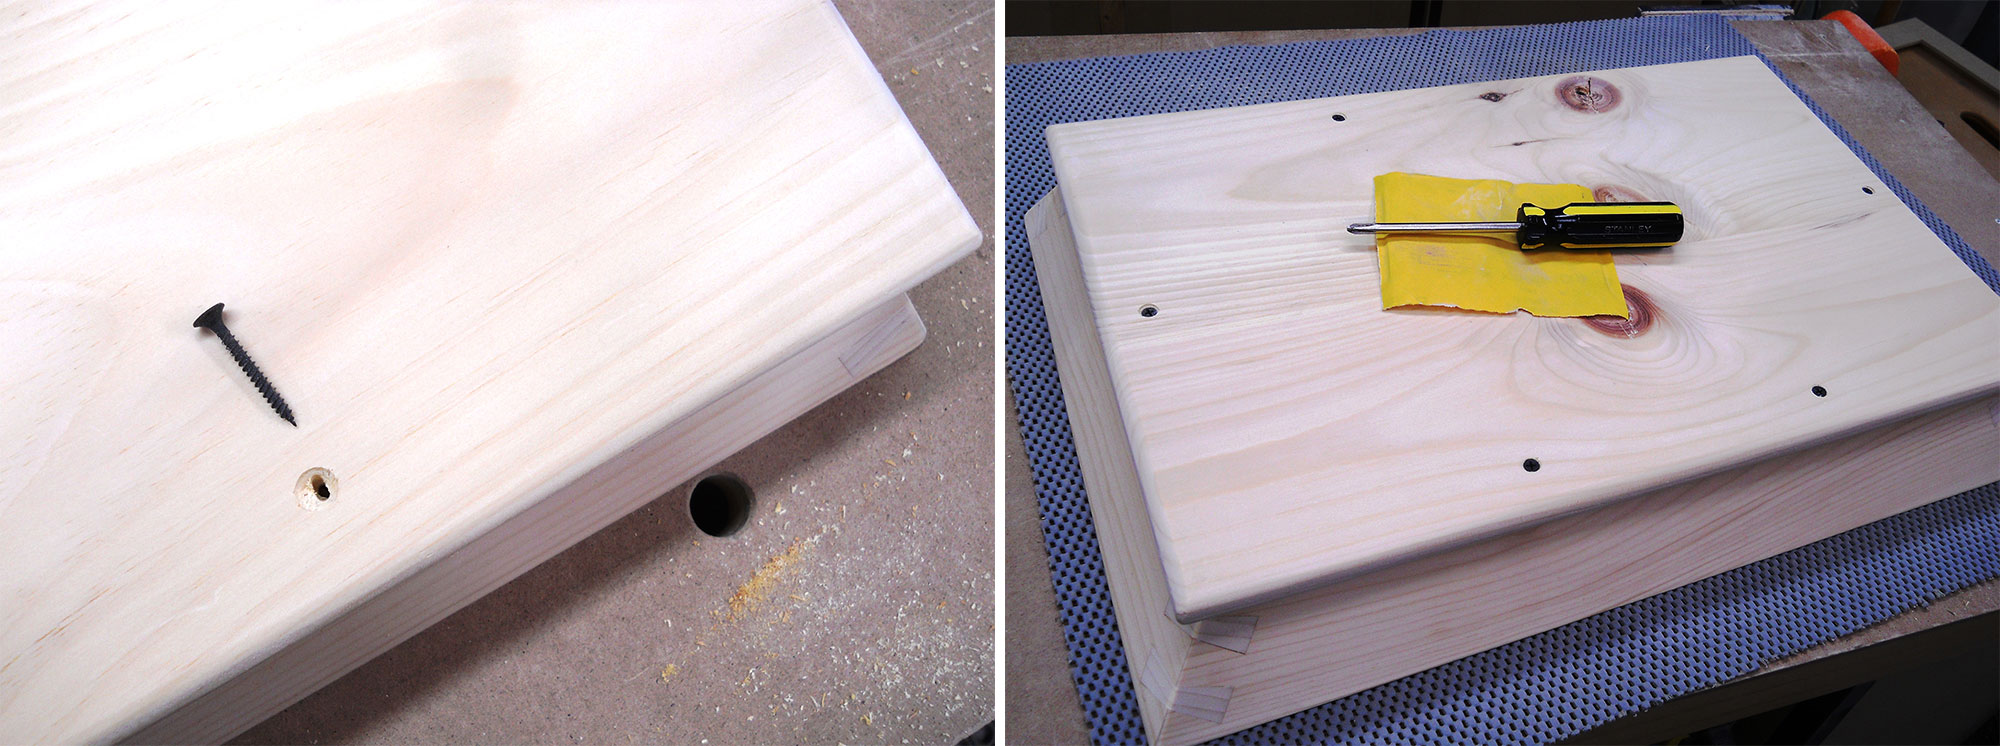 Image 1: Drilling elongated holes to allow for wood movement. Image 2: Installing screws.